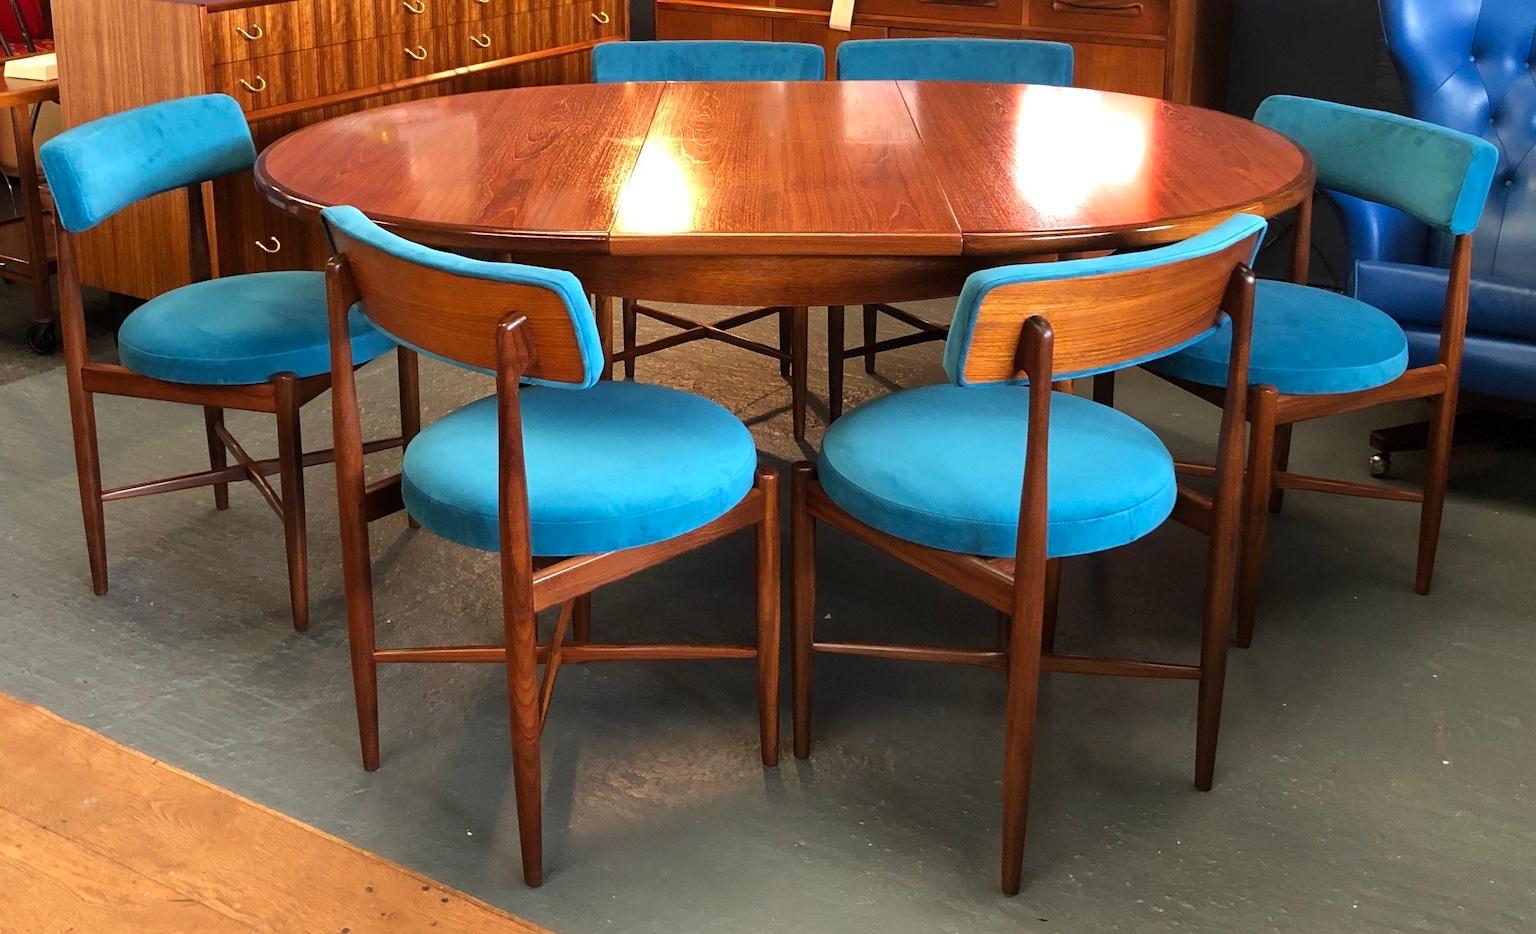 Midcentury G plan ‘Fresco’ dining table & 6 x chairs by V B Wilkins, 1960s

Dining set consisting of teak dining table plus 6 teak and upholstered chairs. Designed by Victor Wilkins for G-plan in the 1960s
The table has a hidden butterfly leaf